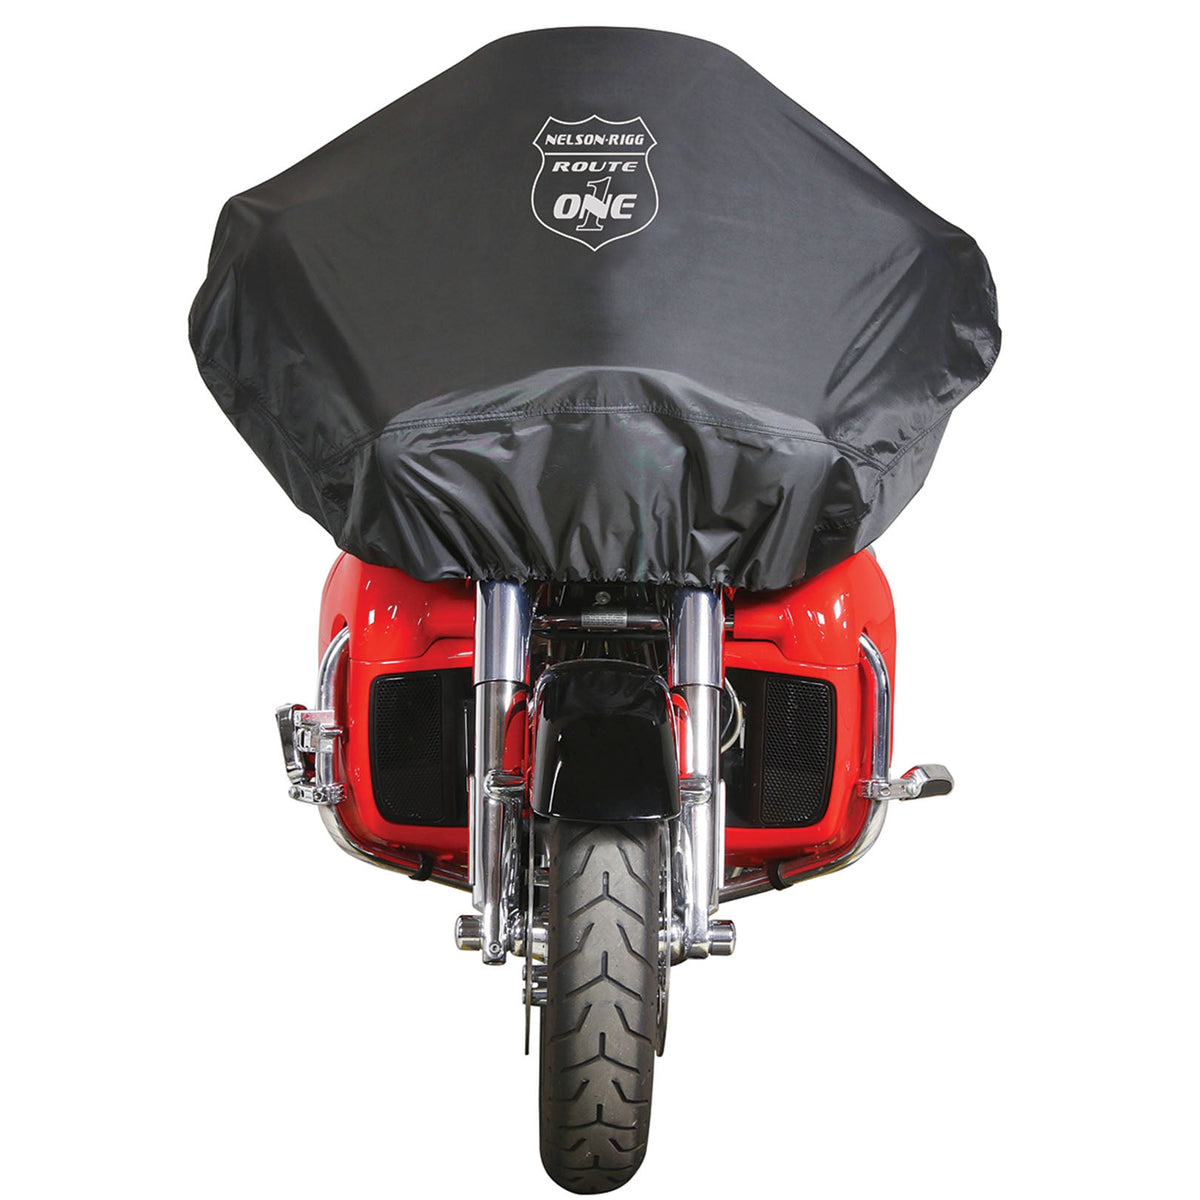 Nelson-Rigg DEX-RT1H Defender Extreme Touring and Adventure Motorcycle Half-Cover